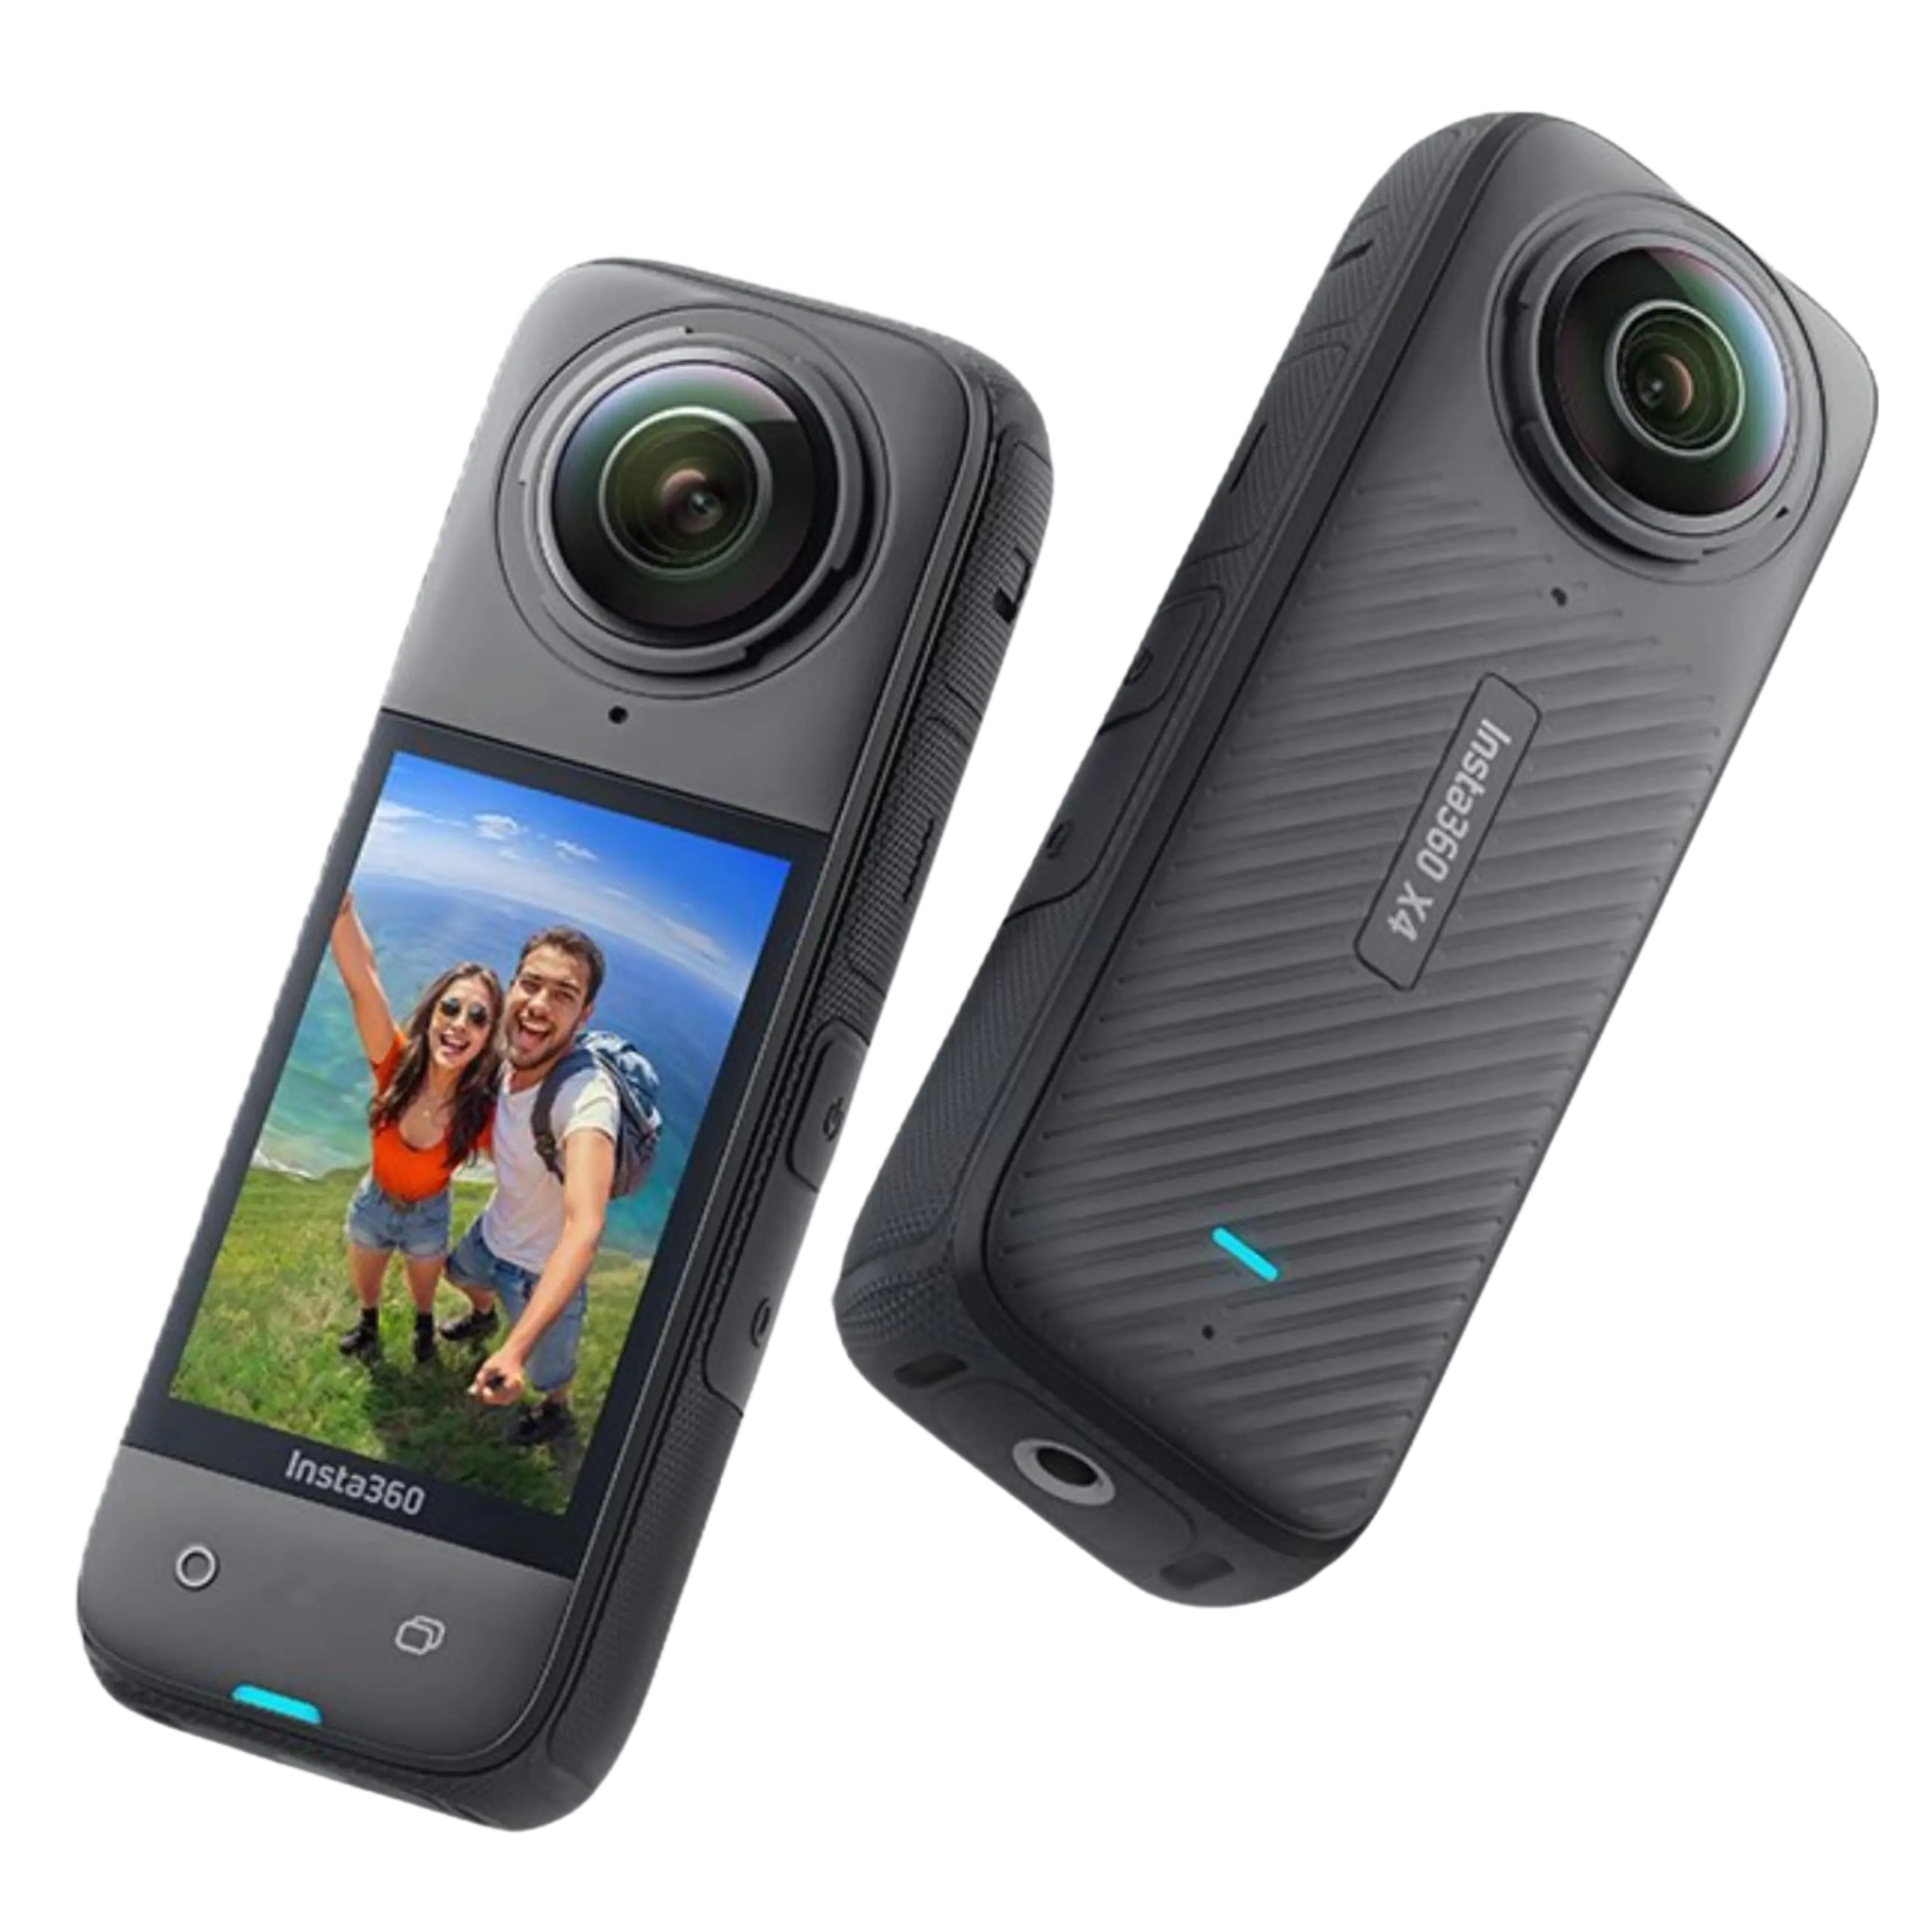 Rent Action Cameras from SharePal - India's most loved lifestyle gear rental platform. Affordable rates, fast delivery, & top-notch customer service